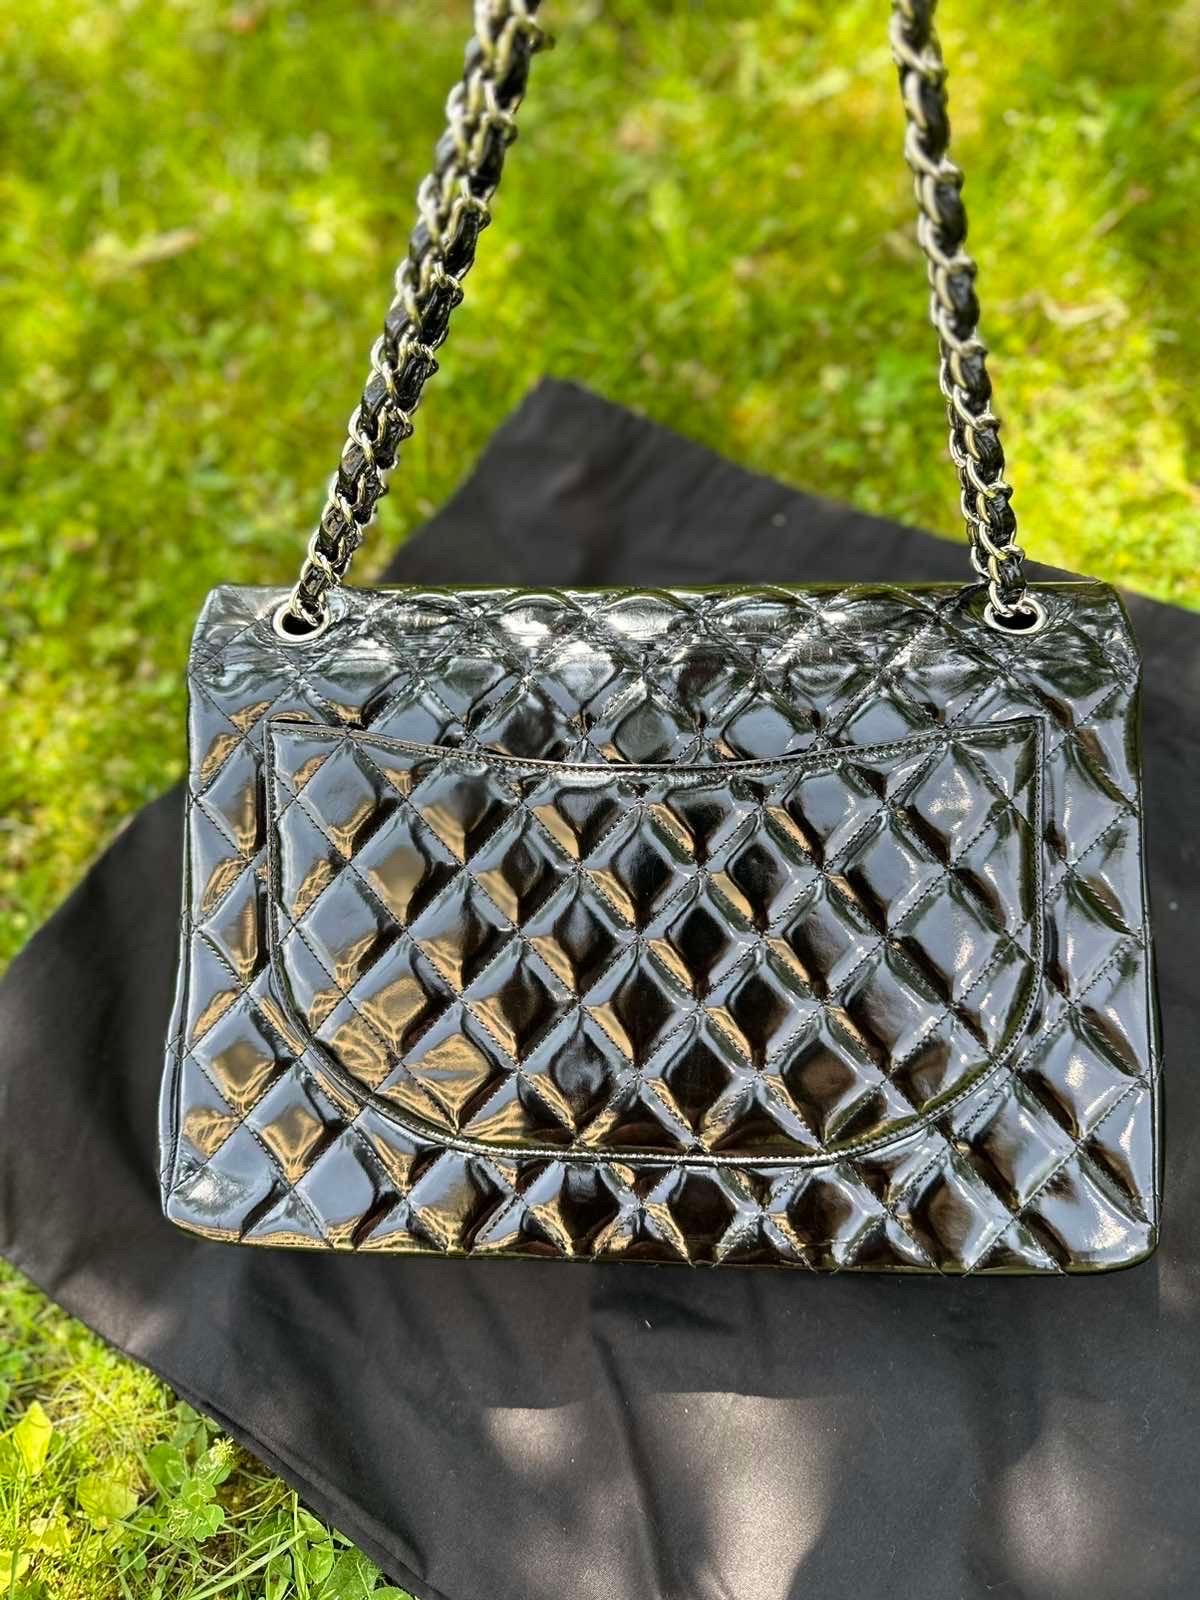 Chanel Jumbo Double Flap bag in black patent  leather with metallic details in silver.
This particular bag features quilted, glossy patent leather, and also features a silvertone turnlock CC closure and double flap top. The versatile leather strap